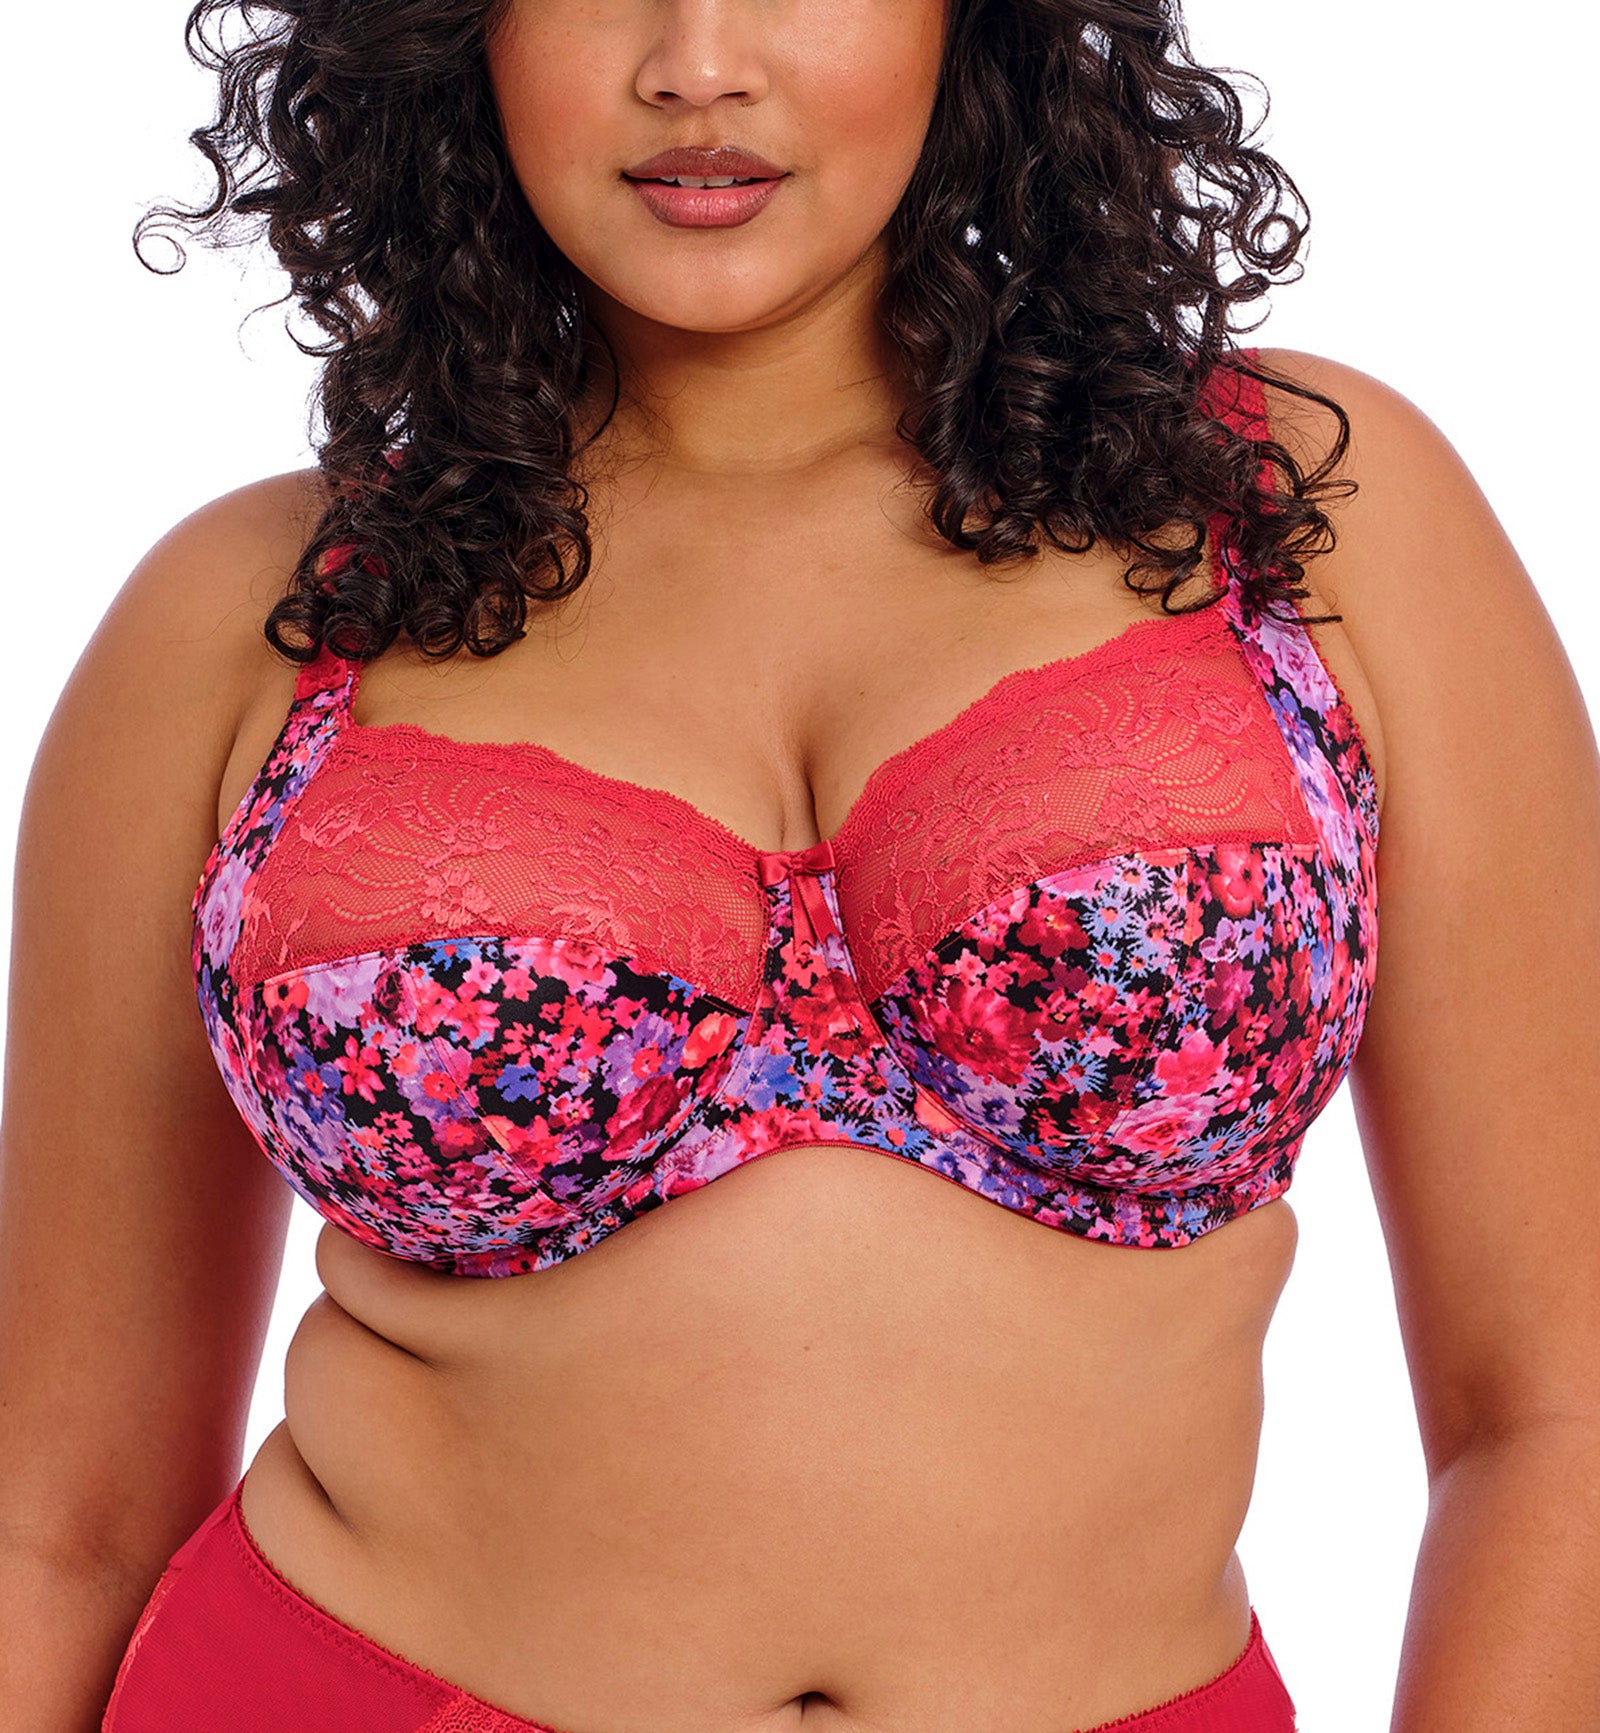 Elomi Morgan Stretch Lace Banded Underwire Bra (4110),32GG,Sunset Meadow - Sunset Meadow,32GG